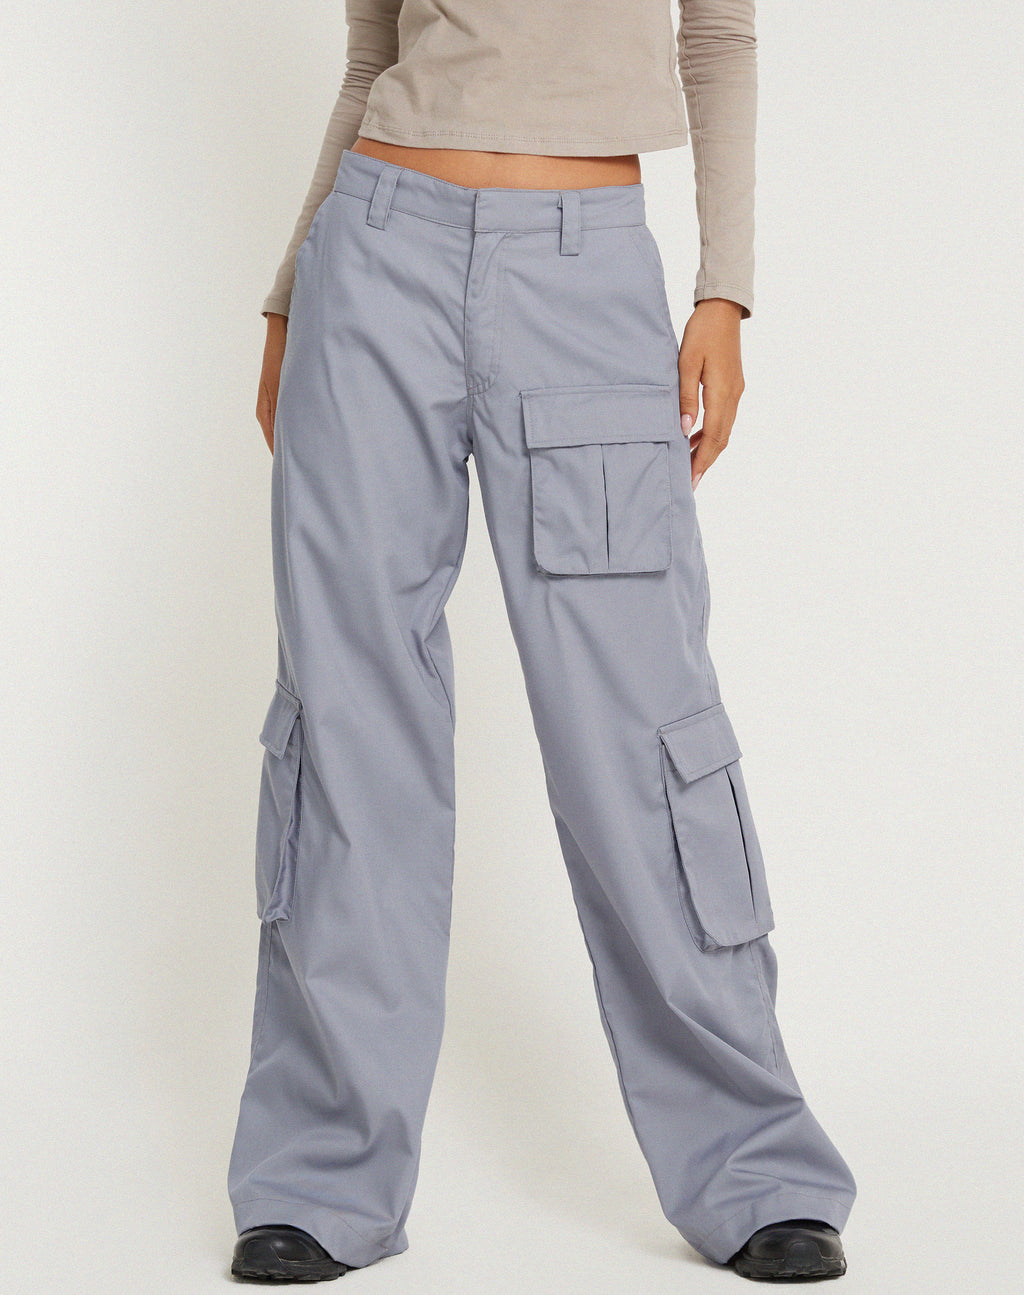 Basha Dark Gray Wide leg pant fitted through hips, XS-S